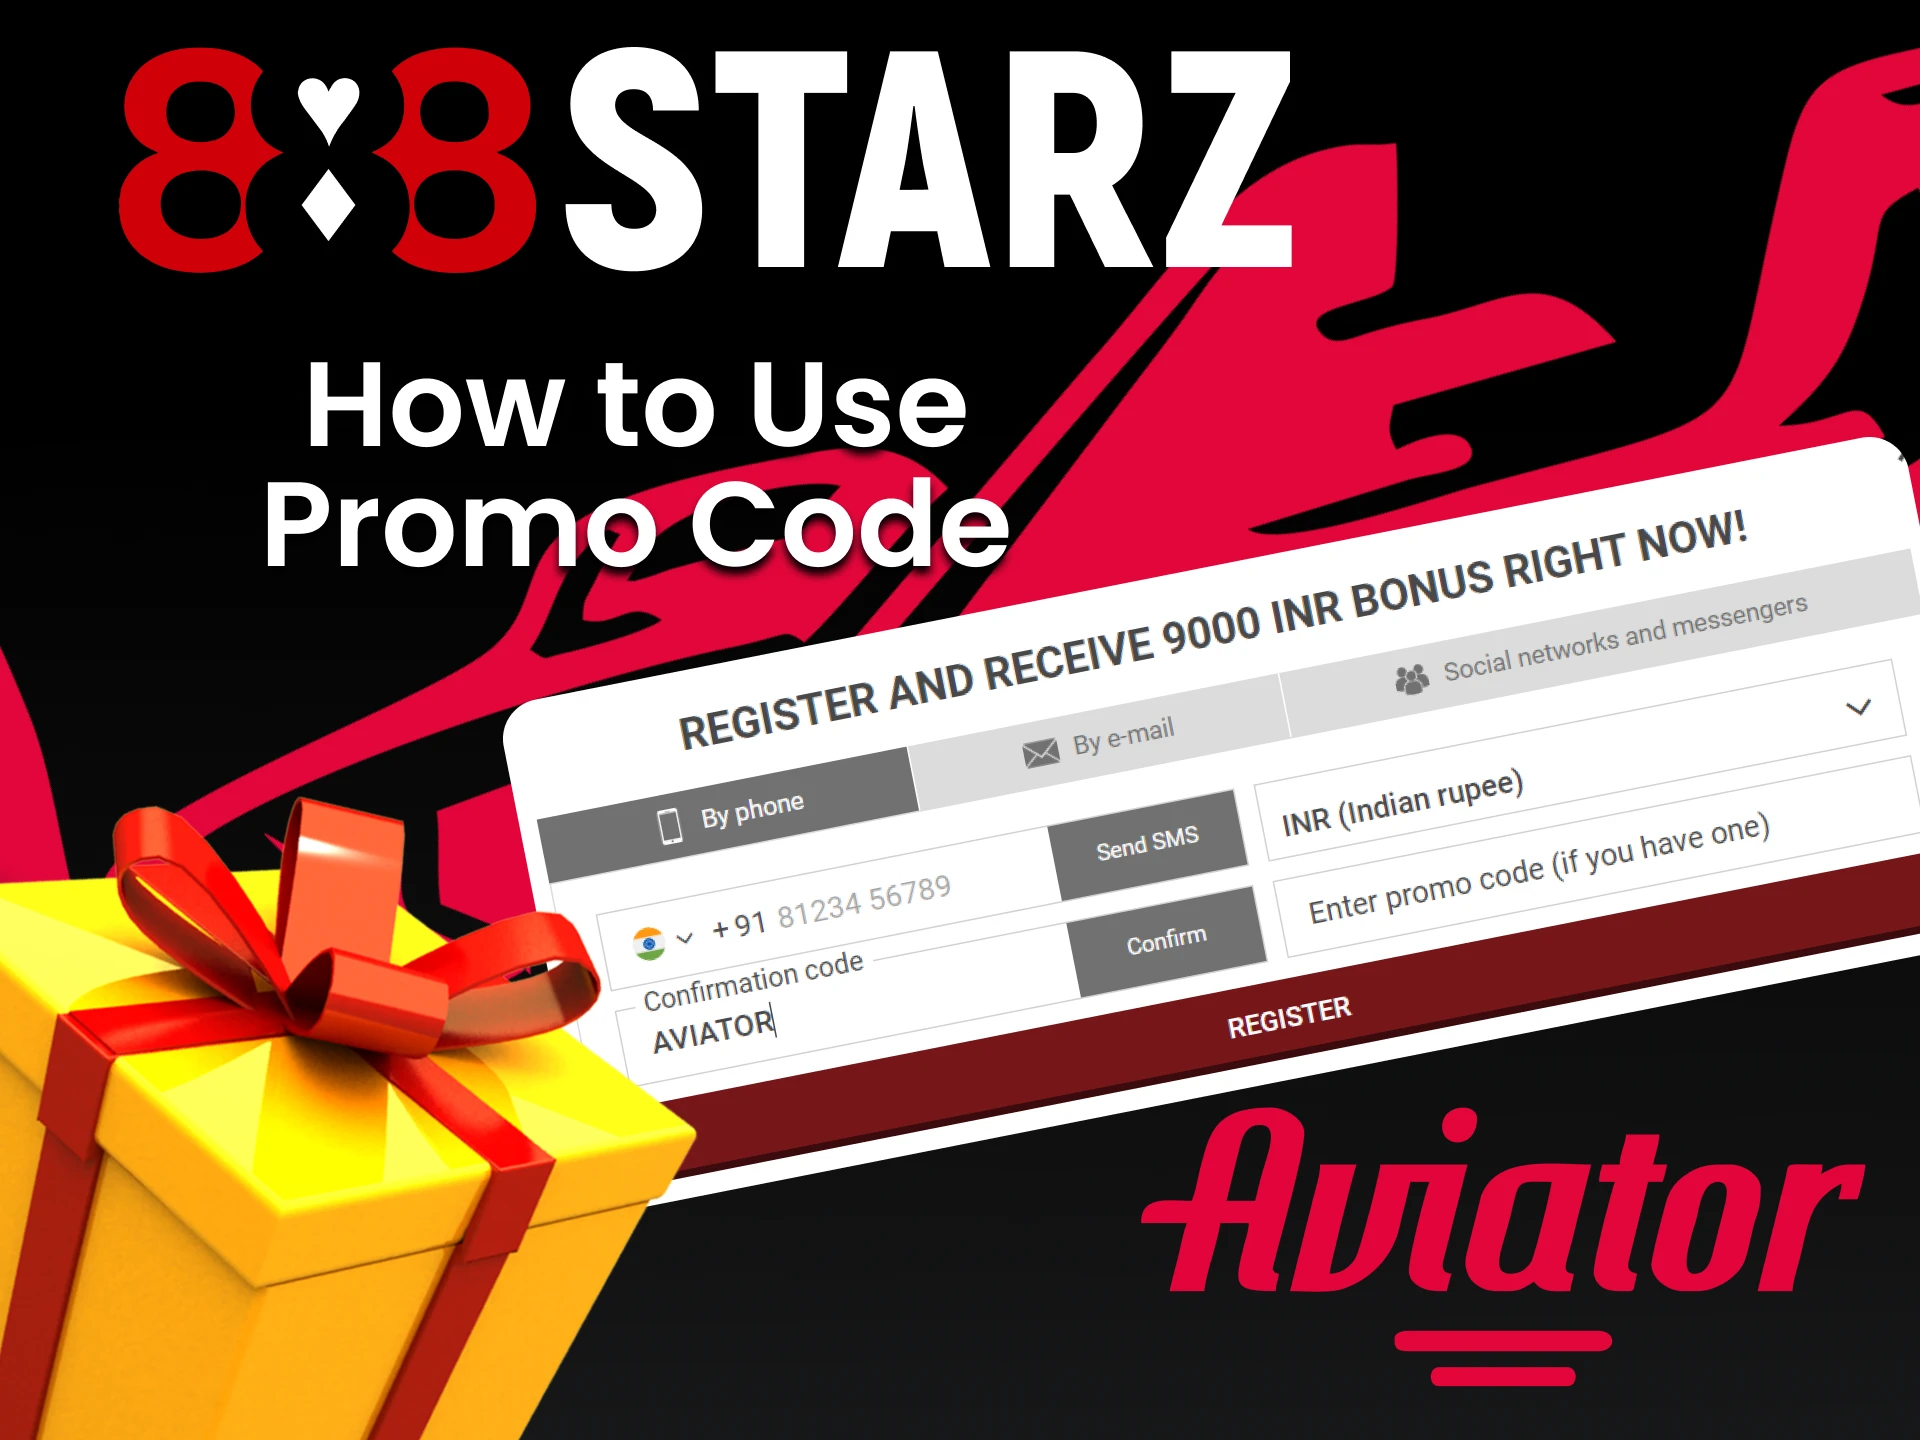 Learn how to apply and use a promo code for Aviator from 888starz.